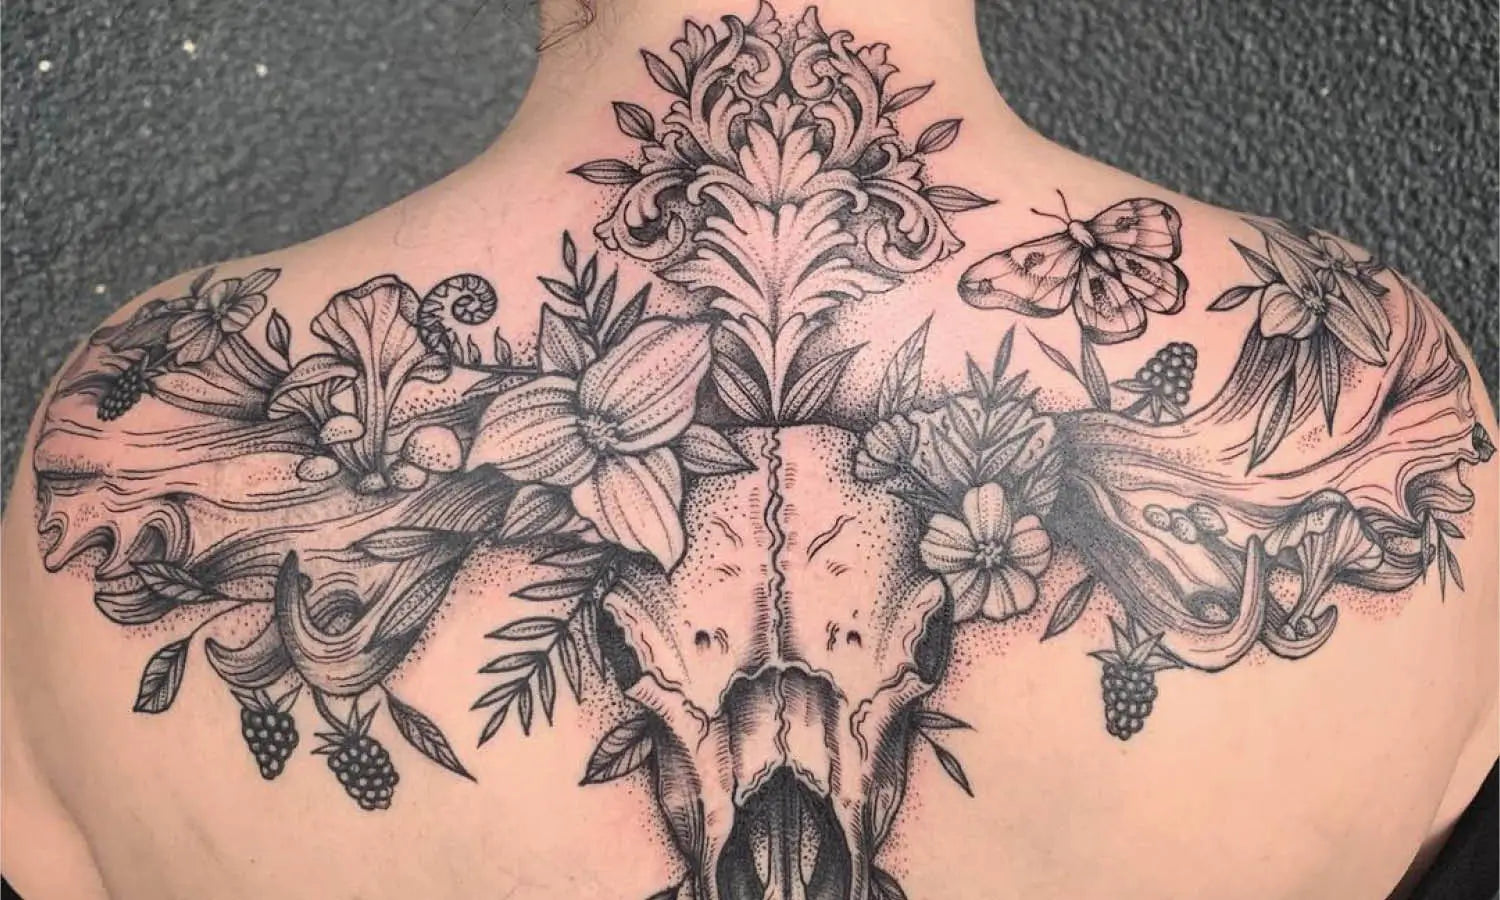 30 Best Moose Tattoo Ideas You Should Check